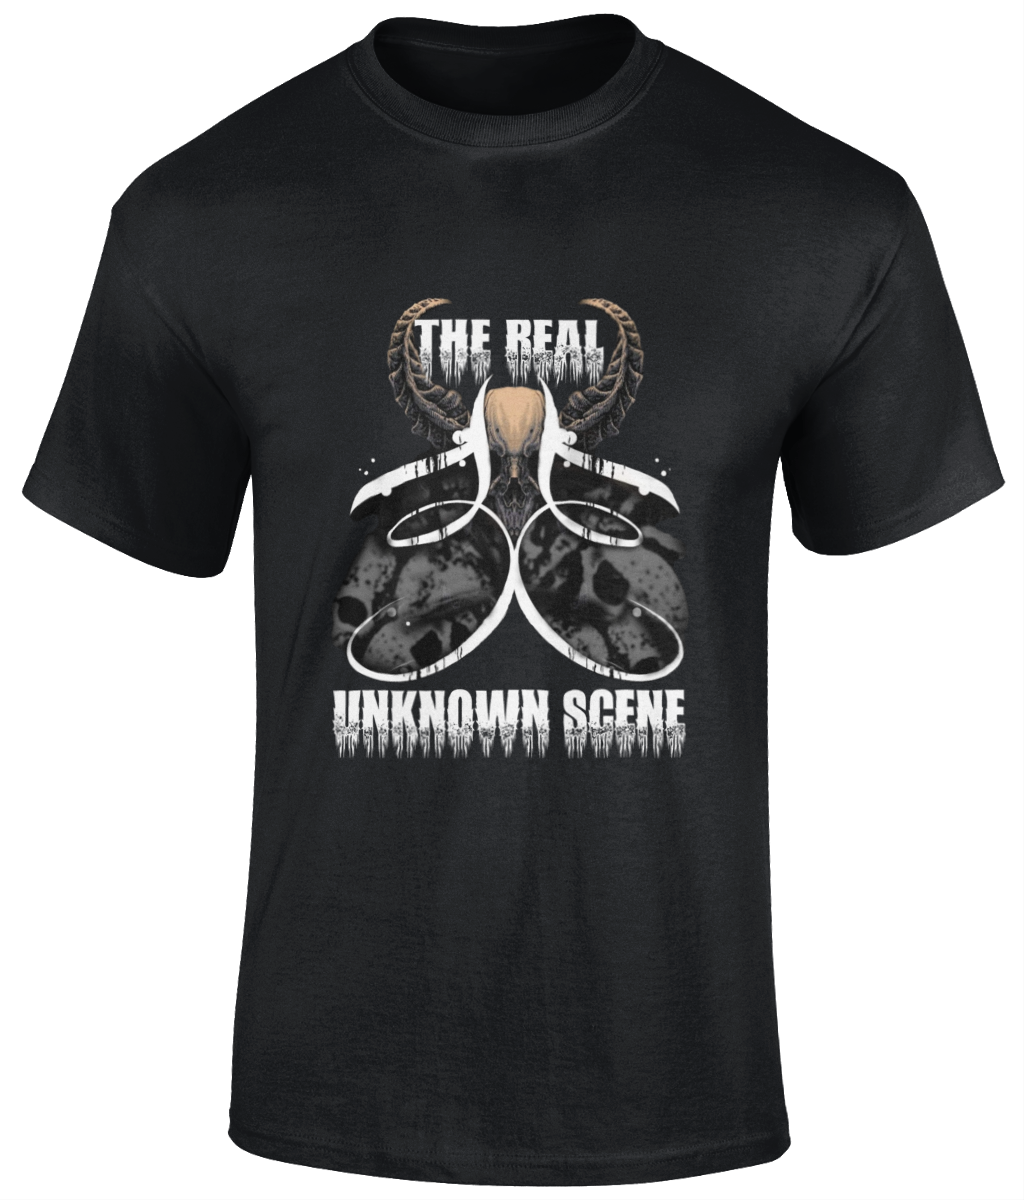 THE REAL UNKNOWN SCENE Black unisex t shirt  Material: 100% cotton.  Seamless twin needle collar. Taped neck and shoulders. Tubular body. Twin needle sleeves and hem. Colour: Black Sizes small to 5XL